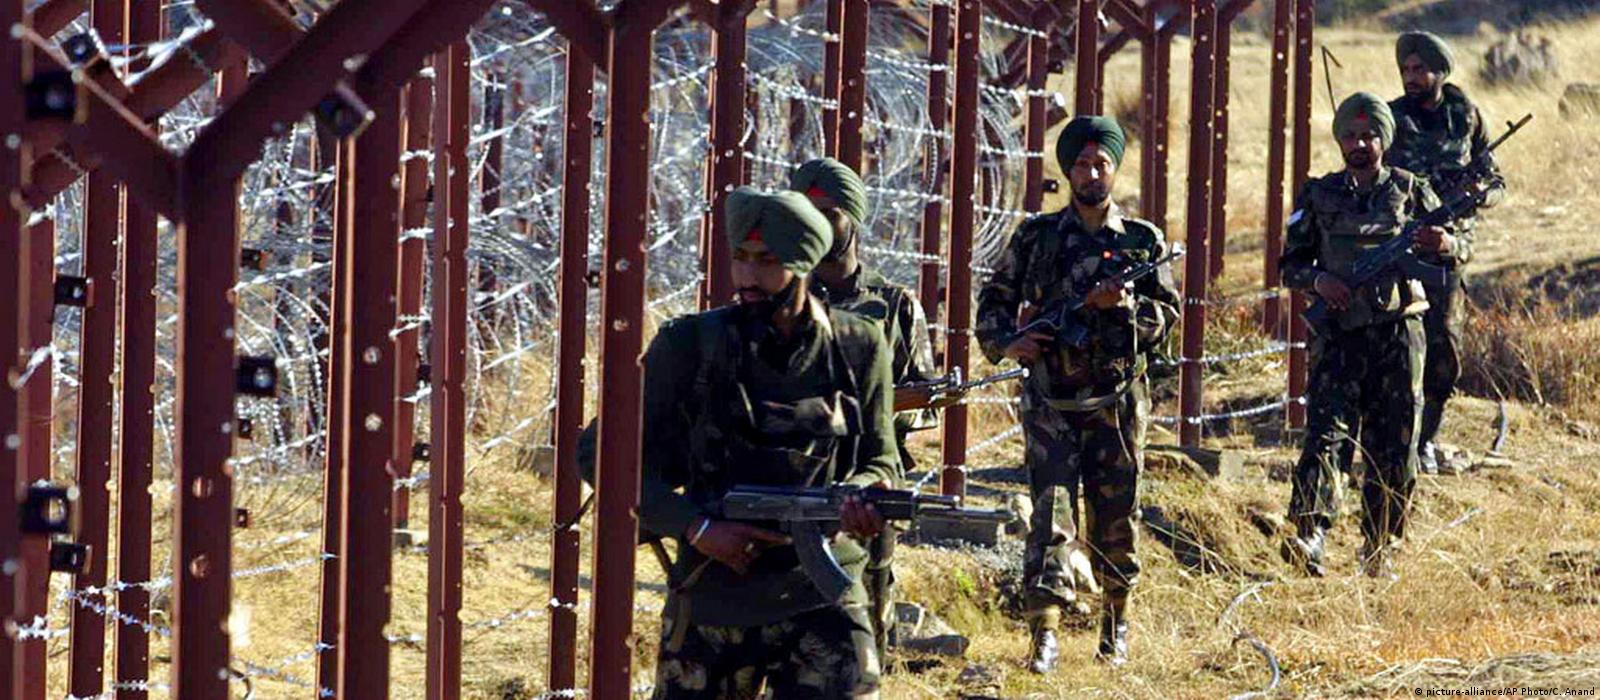 Militants attack Indian Kashmir army camp – DW – 12/05/2014